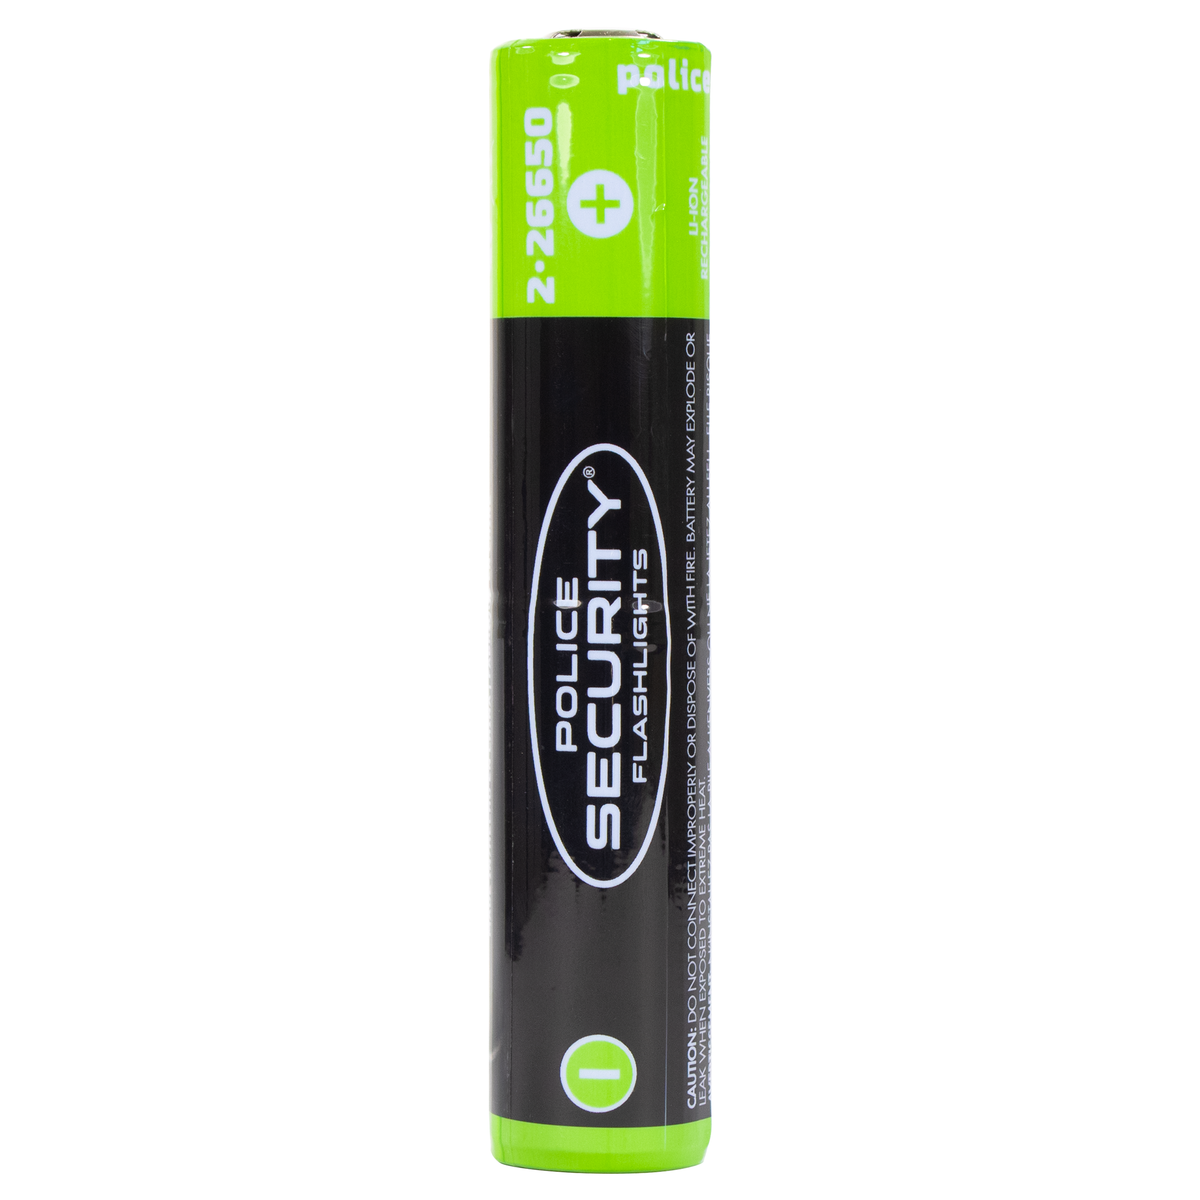 2x 26650 Rechargeable Battery